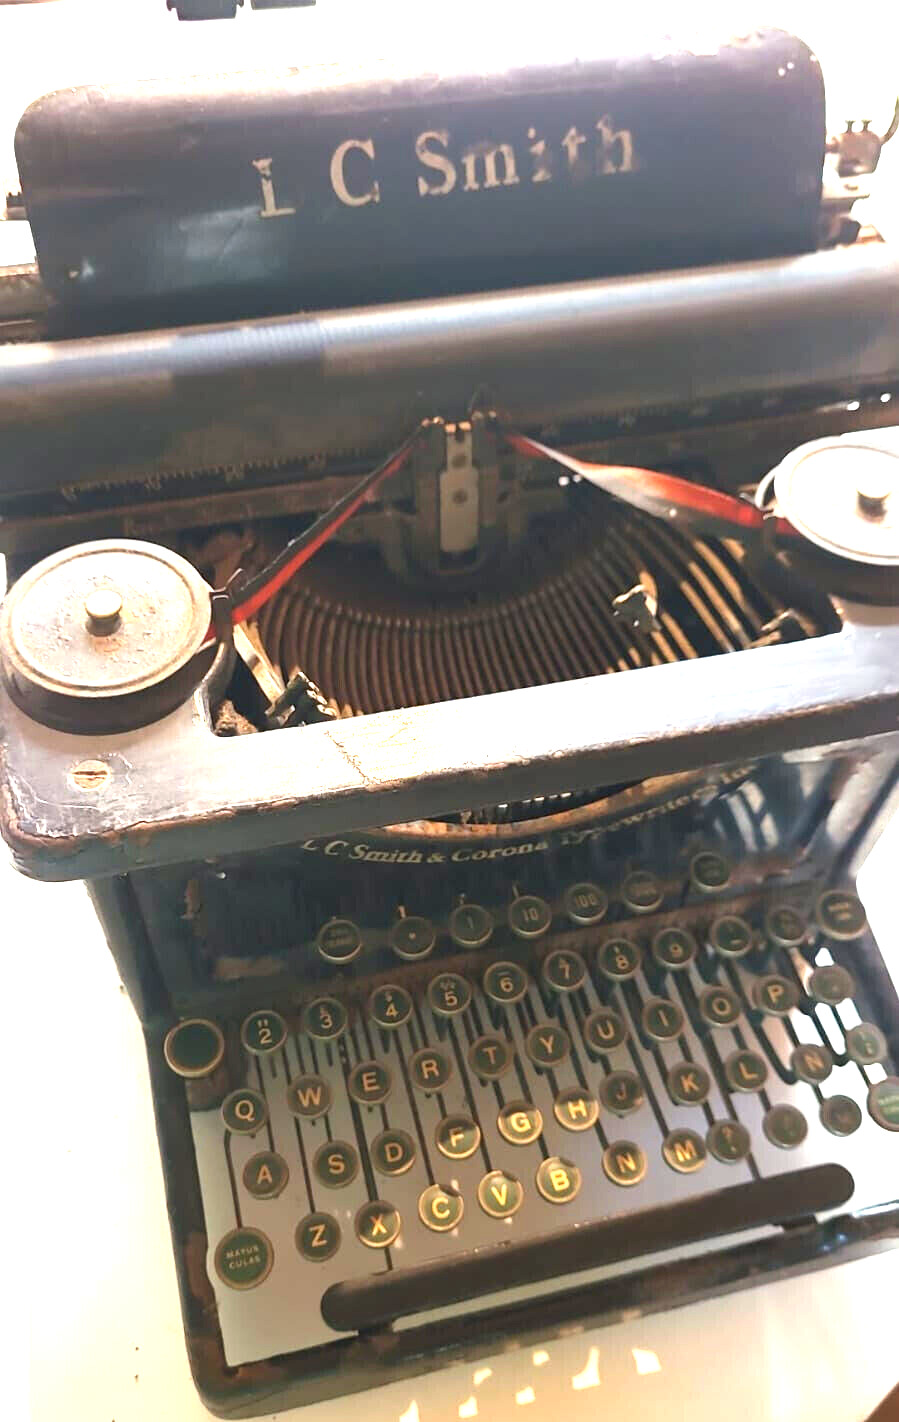 Antique LC Smith & Corona Typewriter - Untested, Rusty - Rare Find for Collecto